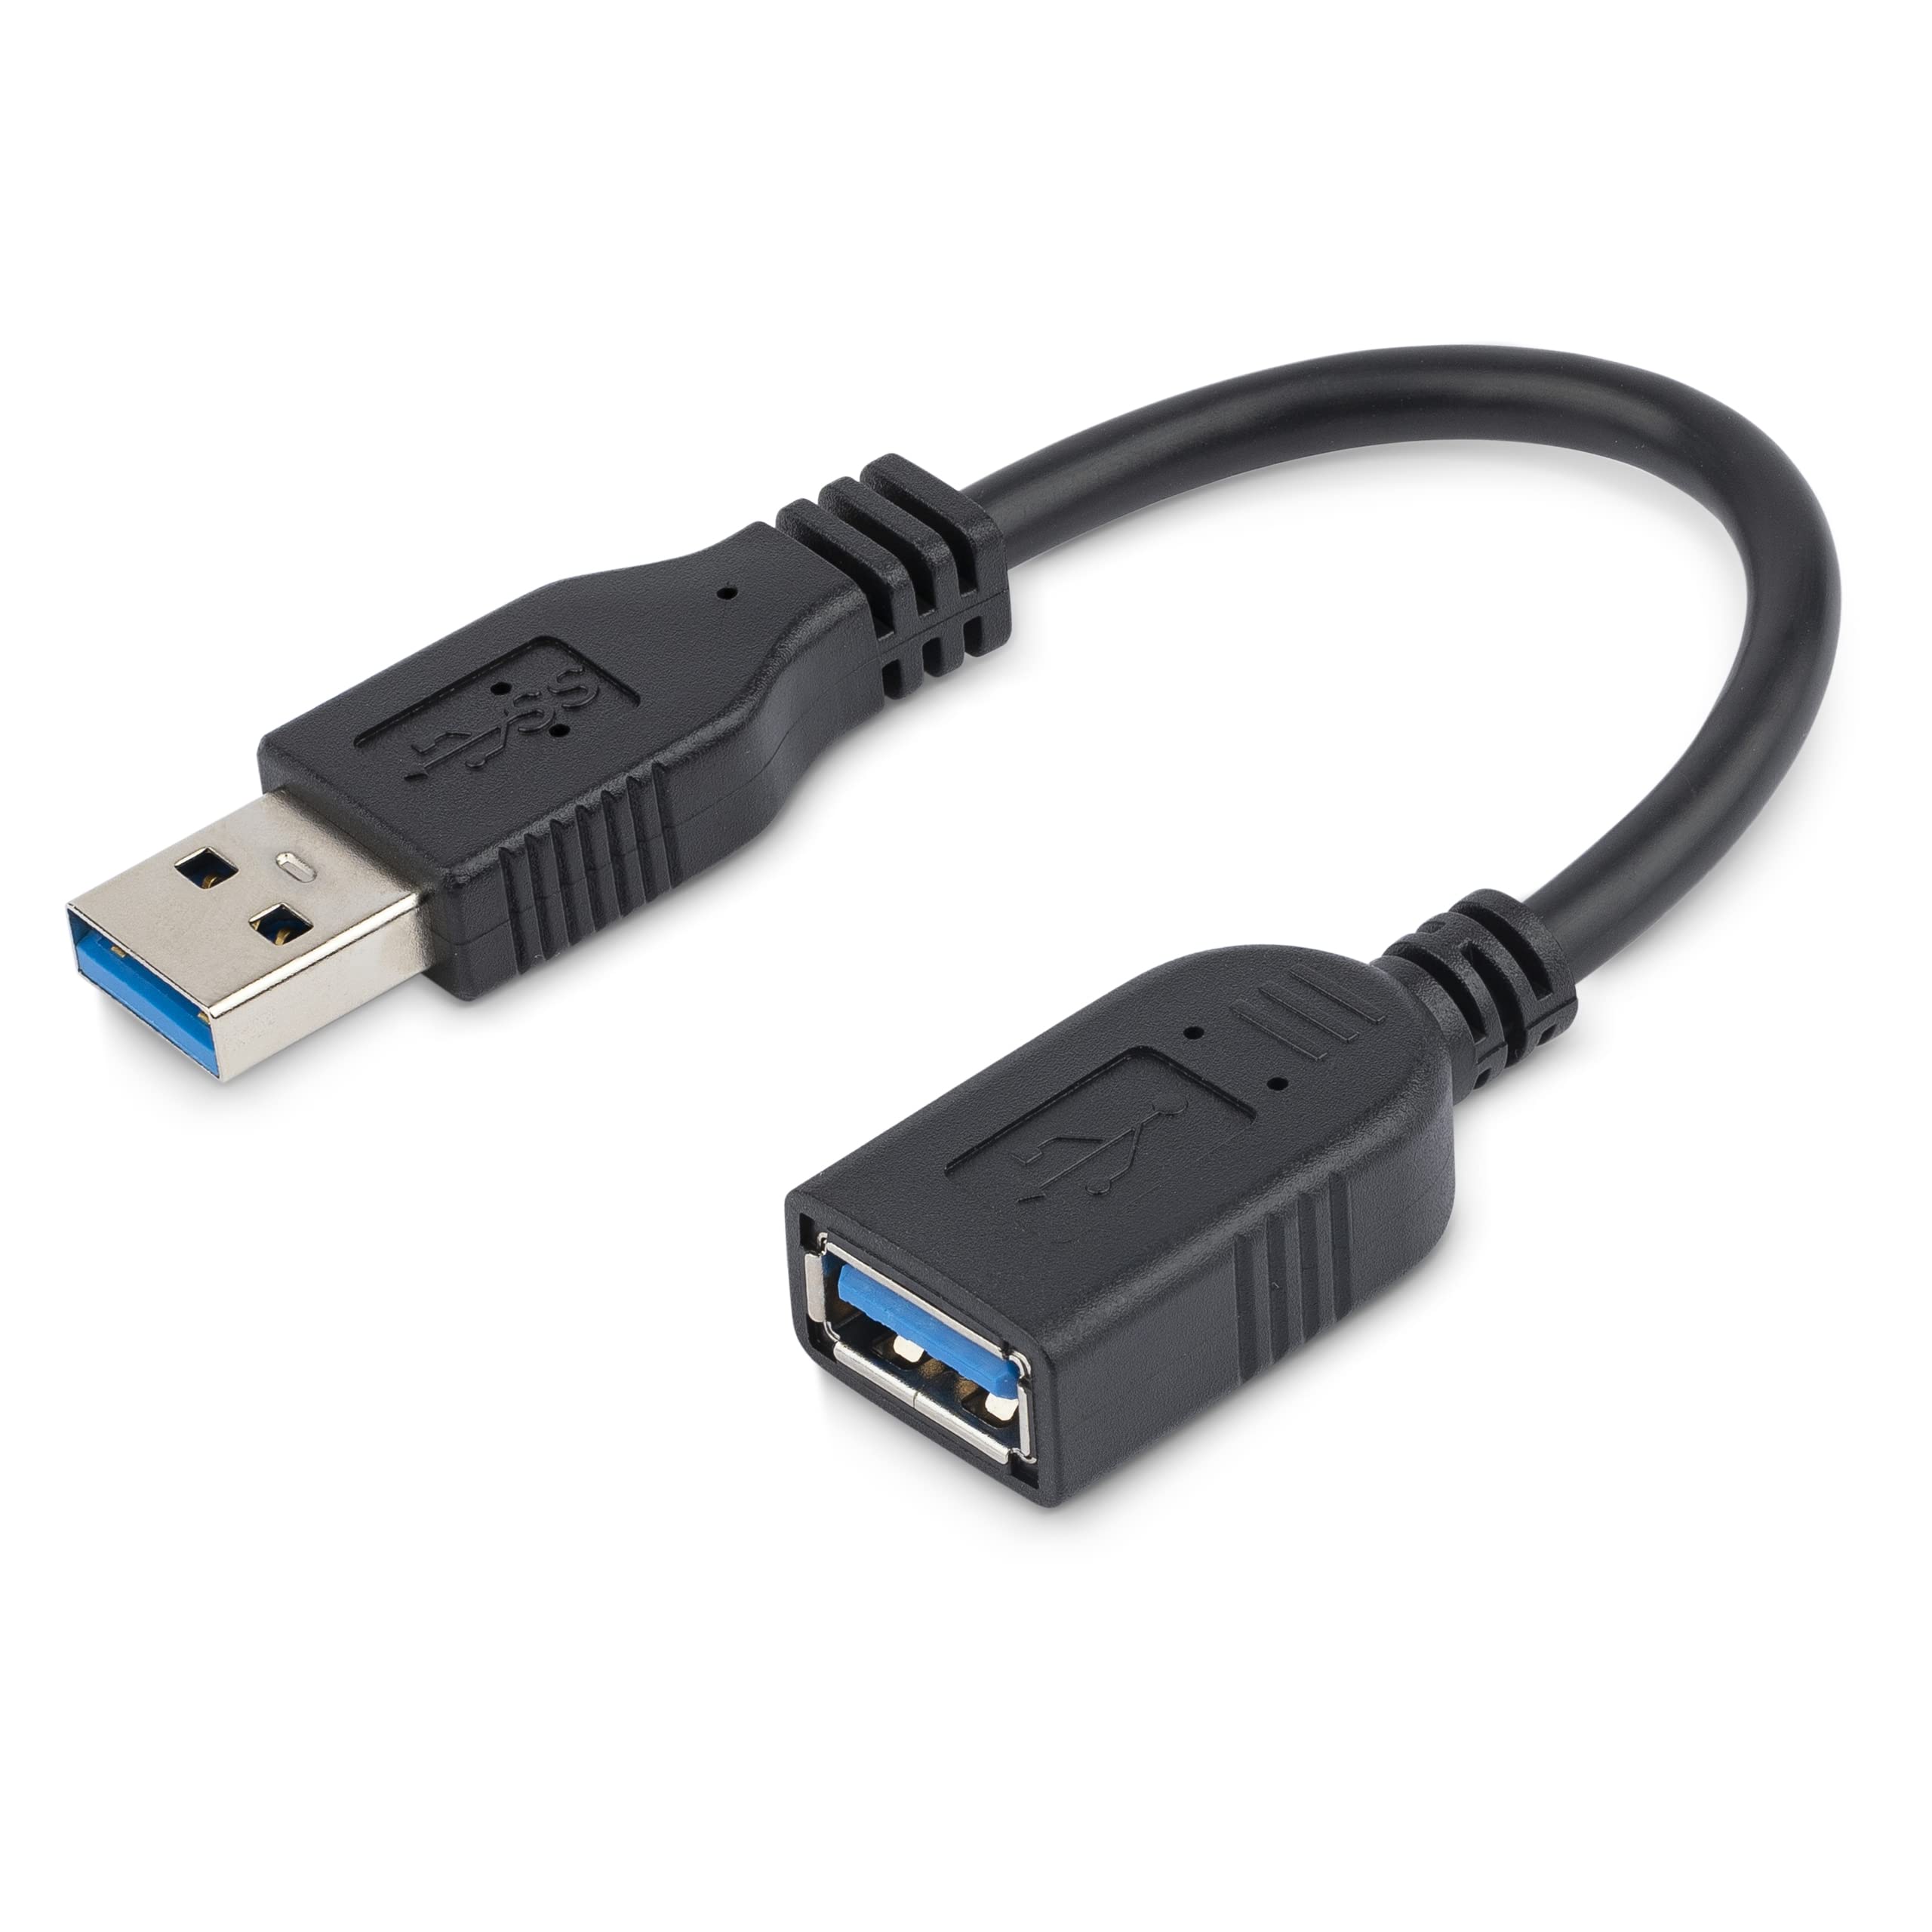 A USB cable or a USB port.